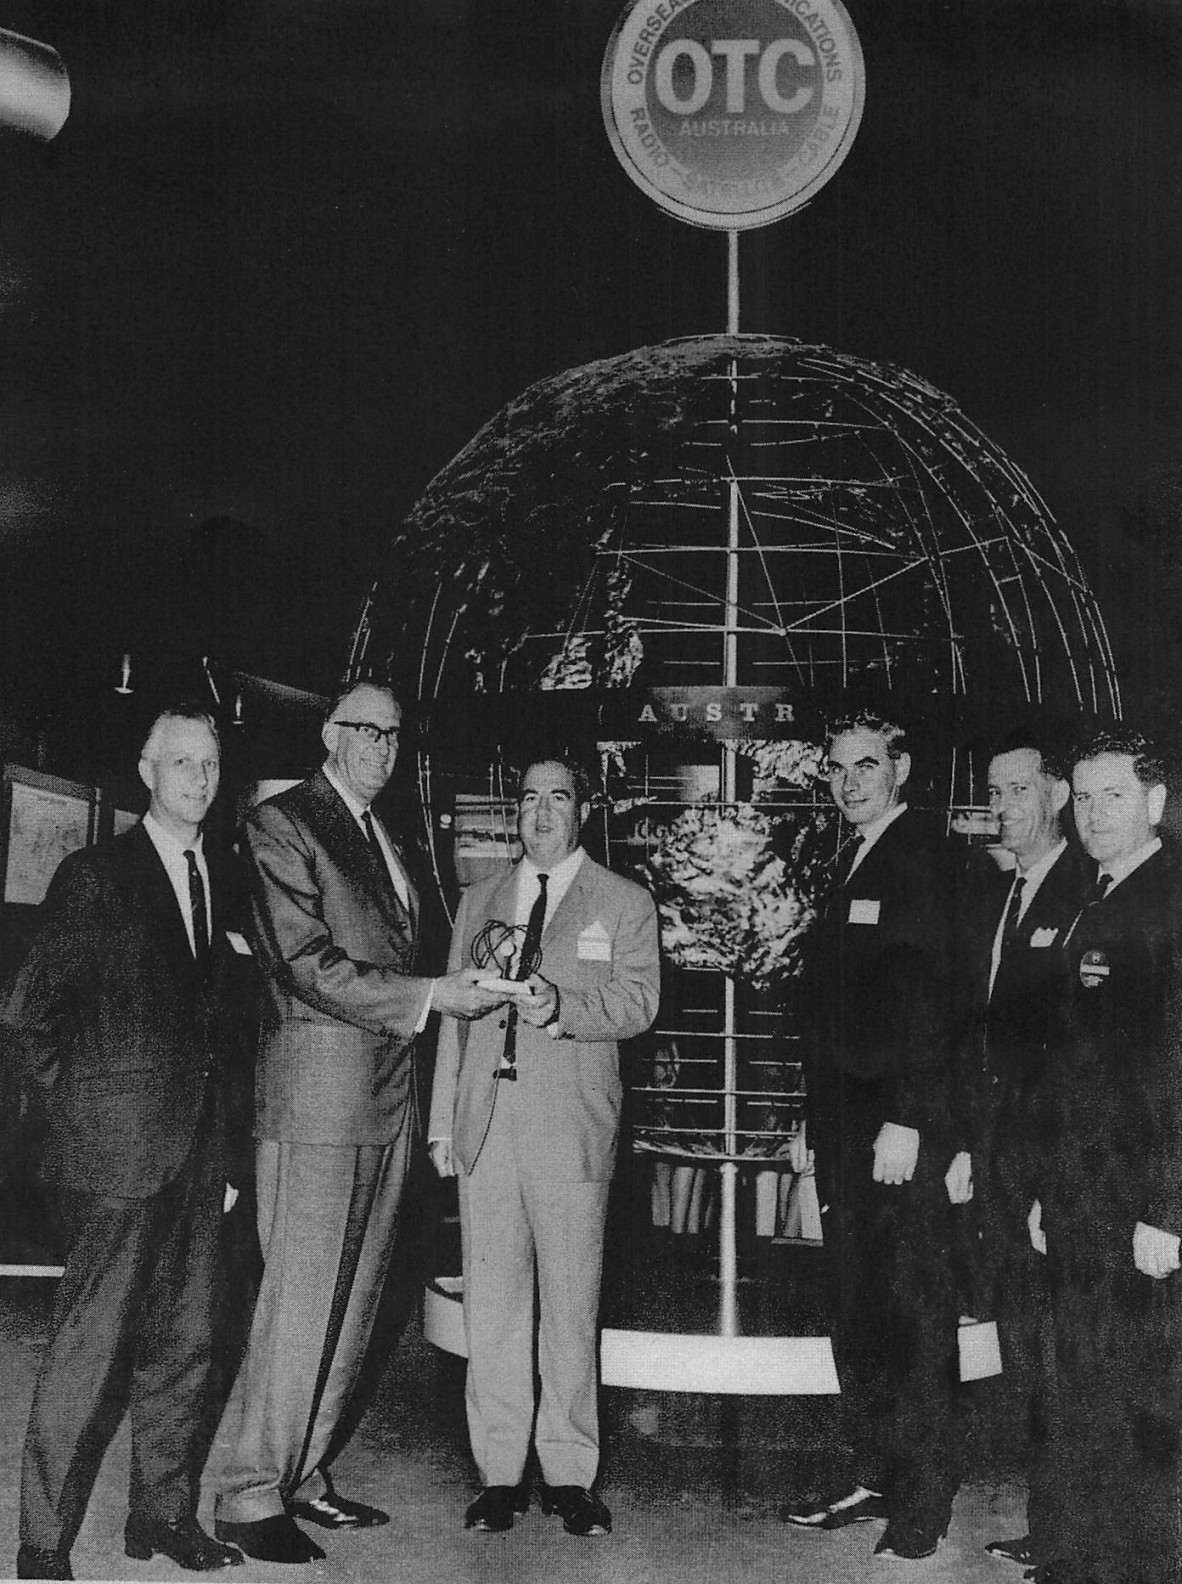 Sir Arthur Petfield and Mr Ray Harris hold an award presented by OTC by the Queensland Chamber of Manufactures for OTC’s exhibit at the 1967 Queensland Industries Fair.